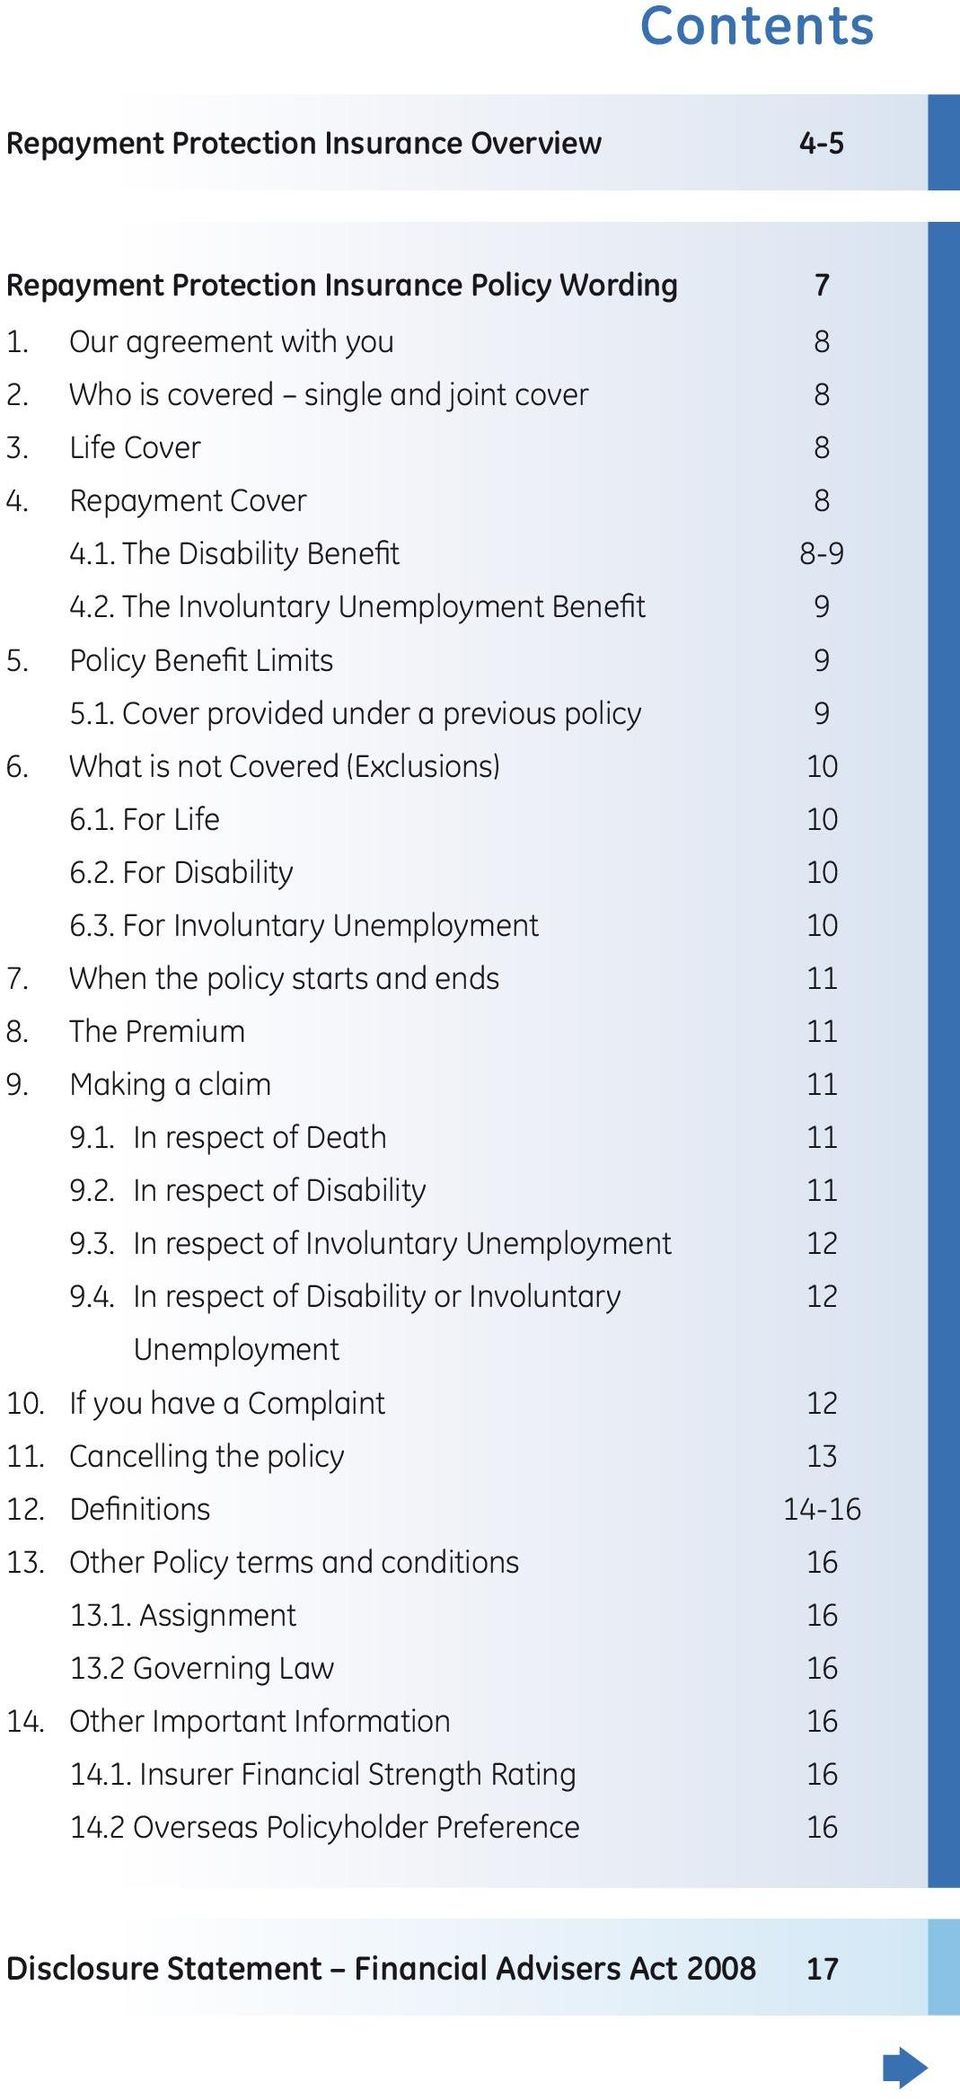 What is not Covered (Exclusions) 10 6.1. For Life 10 6.2. For Disability 10 6.3. For Involuntary Unemployment 10 7. When the policy starts and ends 11 8. The Premium 11 9. Making a claim 11 9.1. In respect of Death 11 9.